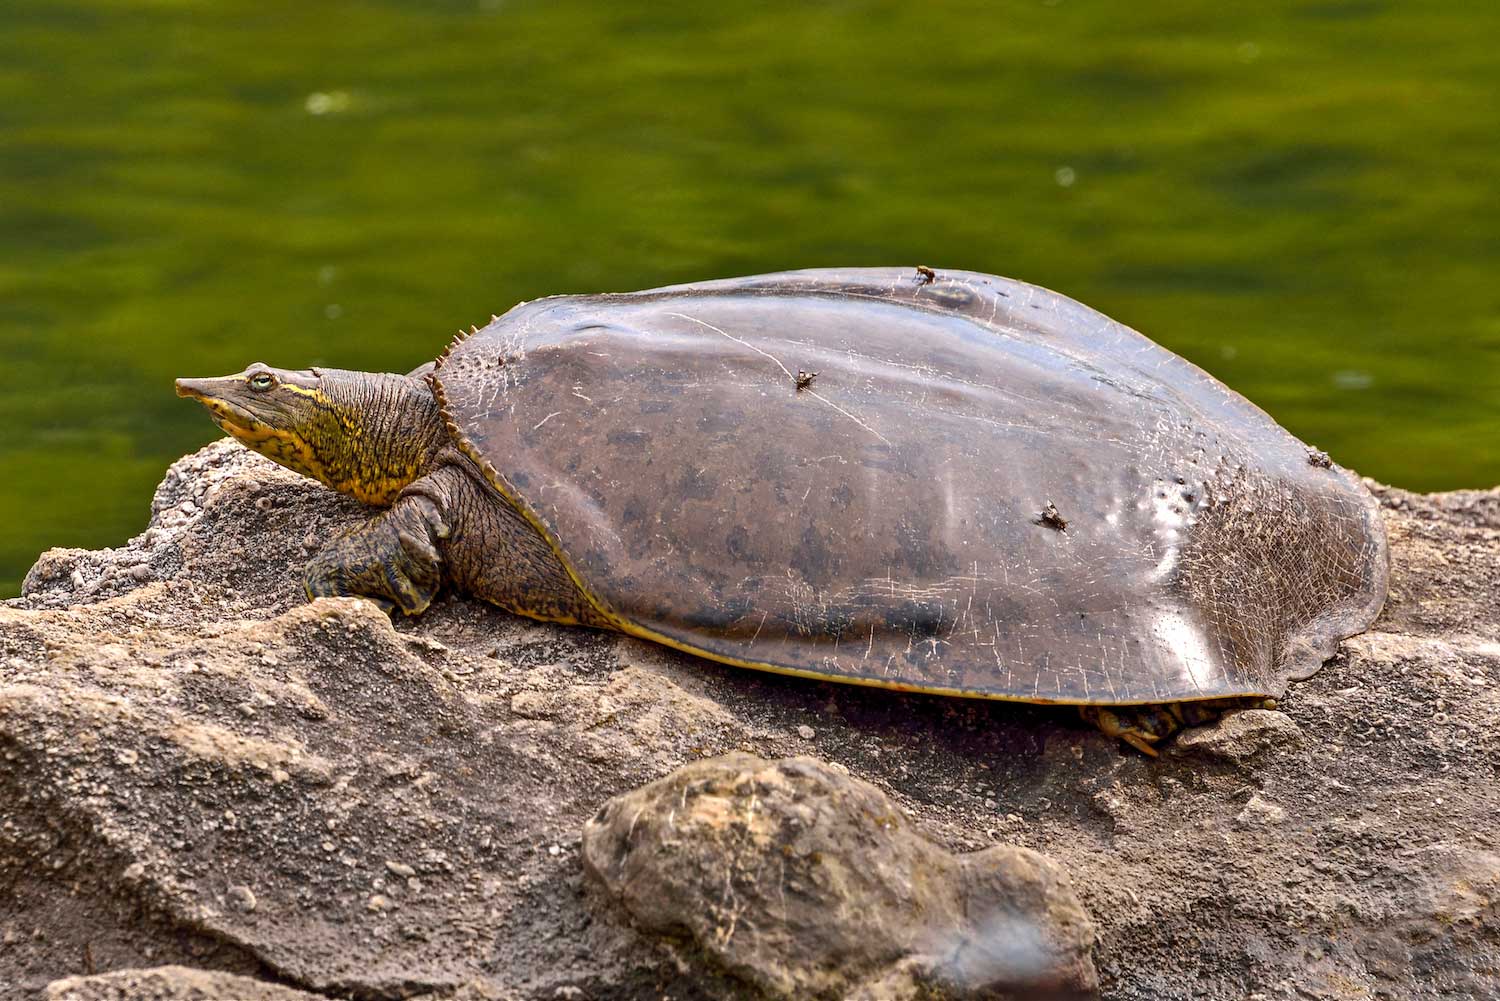 A spiny softshell turtle on a log by water